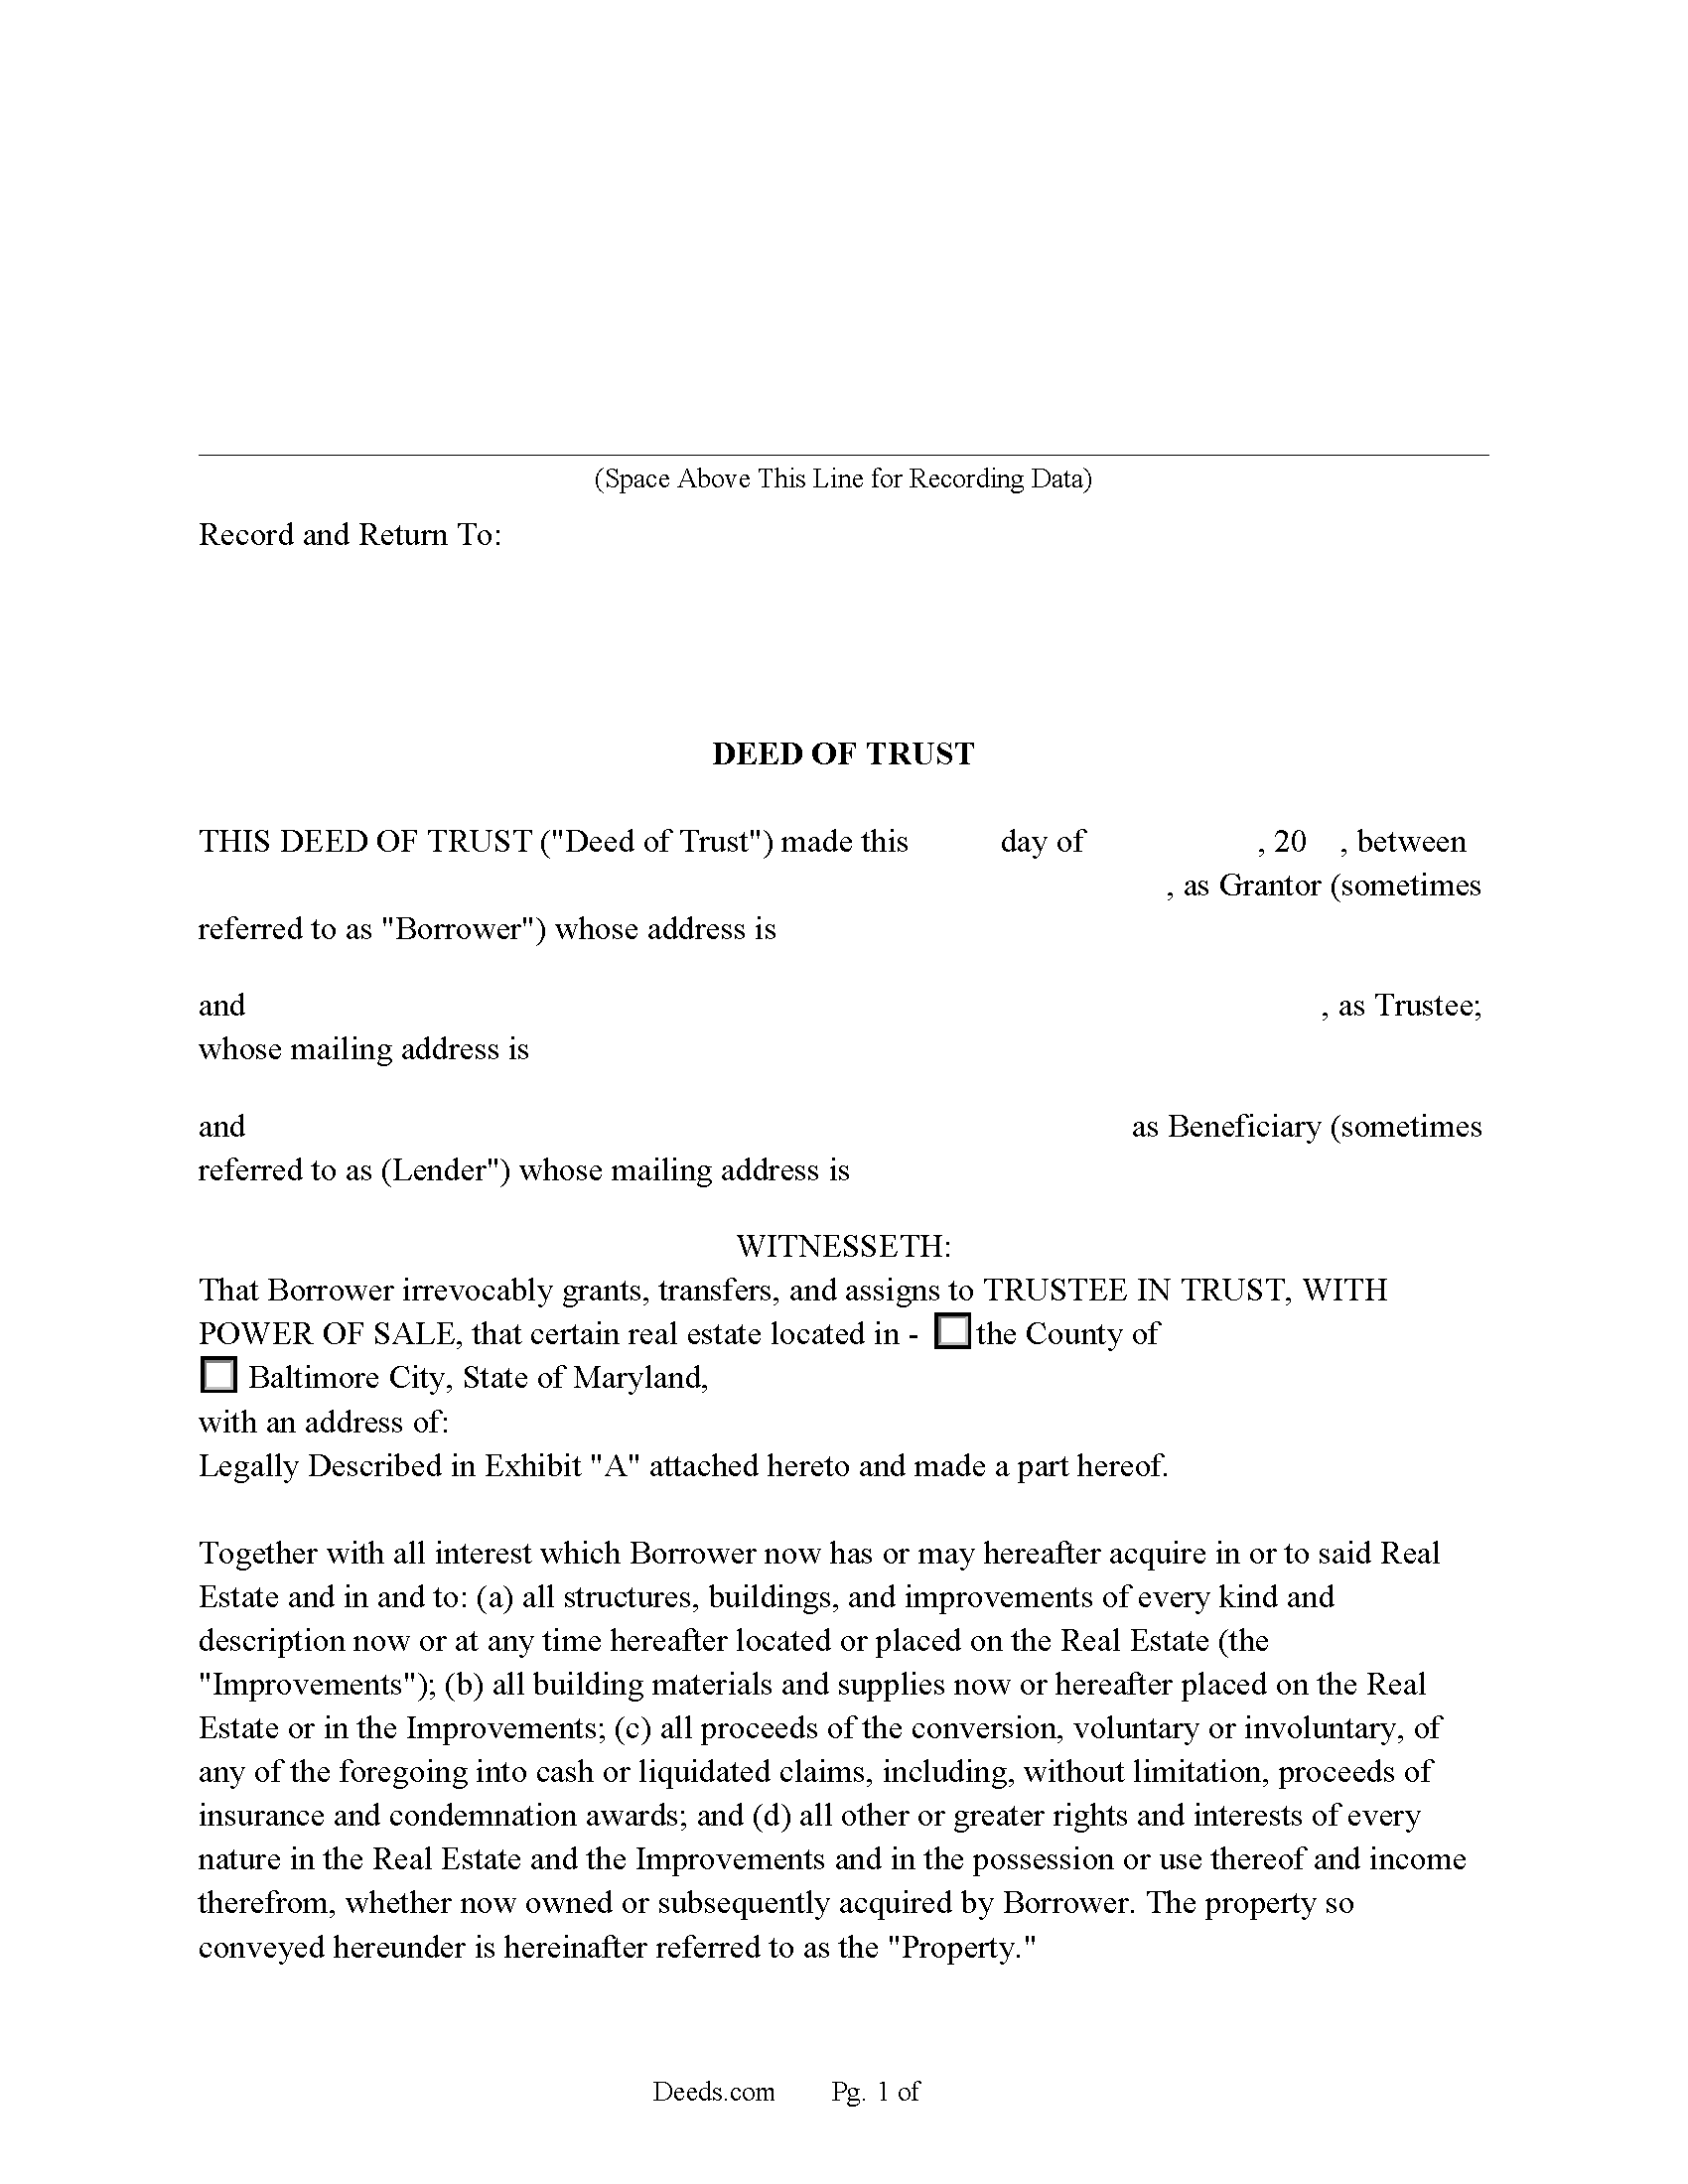 Maryland Deed of Trust and Promissory Note Image